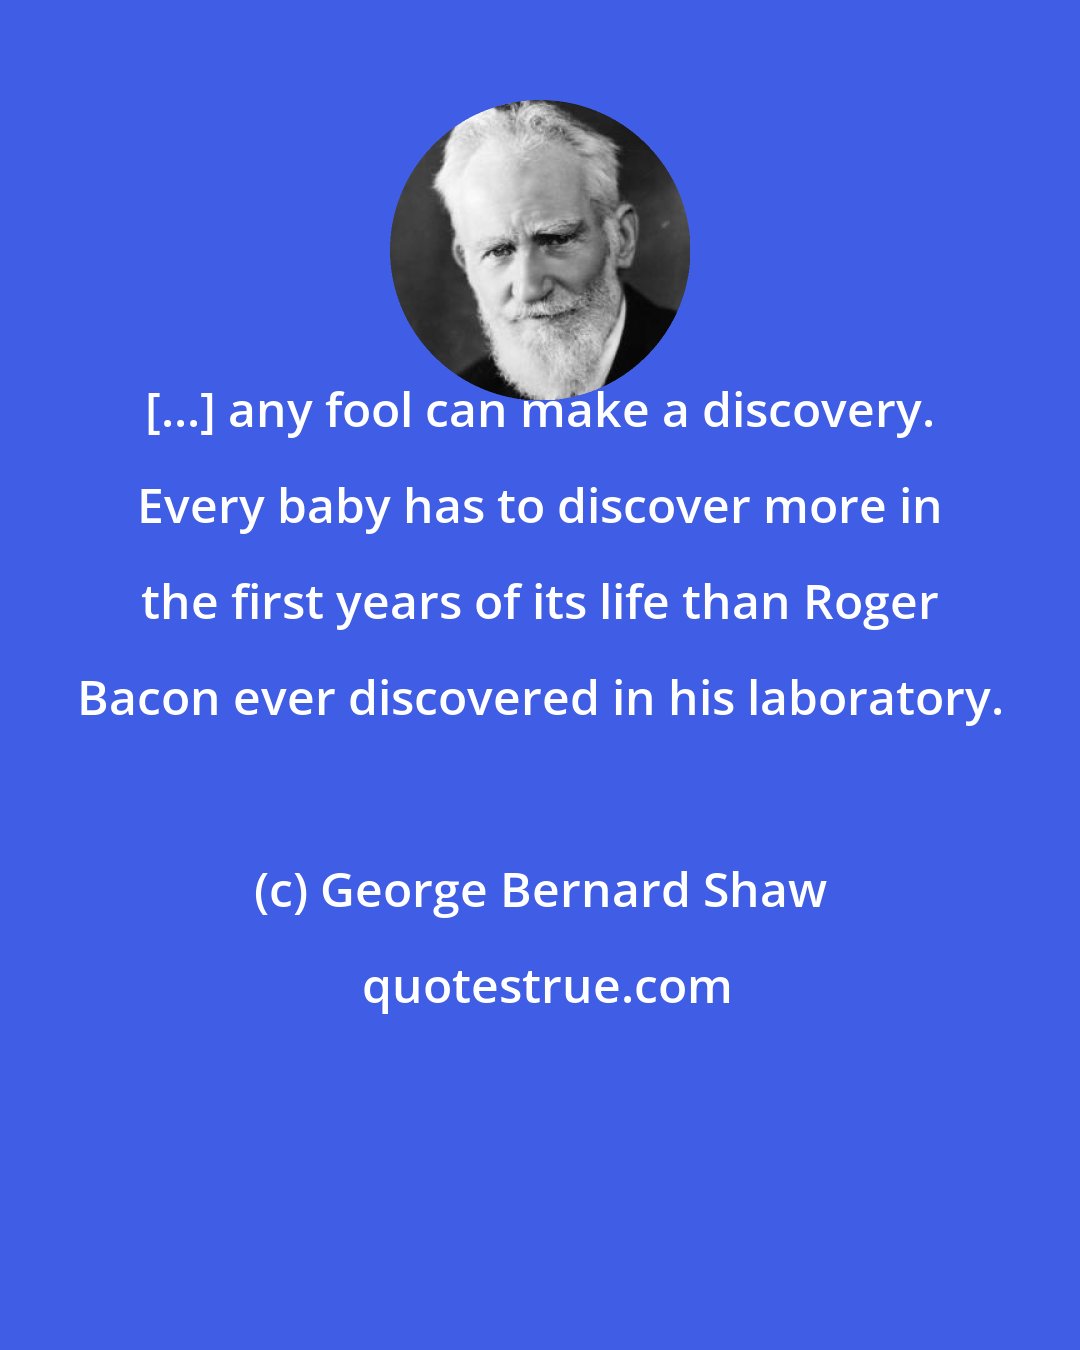 George Bernard Shaw: [...] any fool can make a discovery. Every baby has to discover more in the first years of its life than Roger Bacon ever discovered in his laboratory.